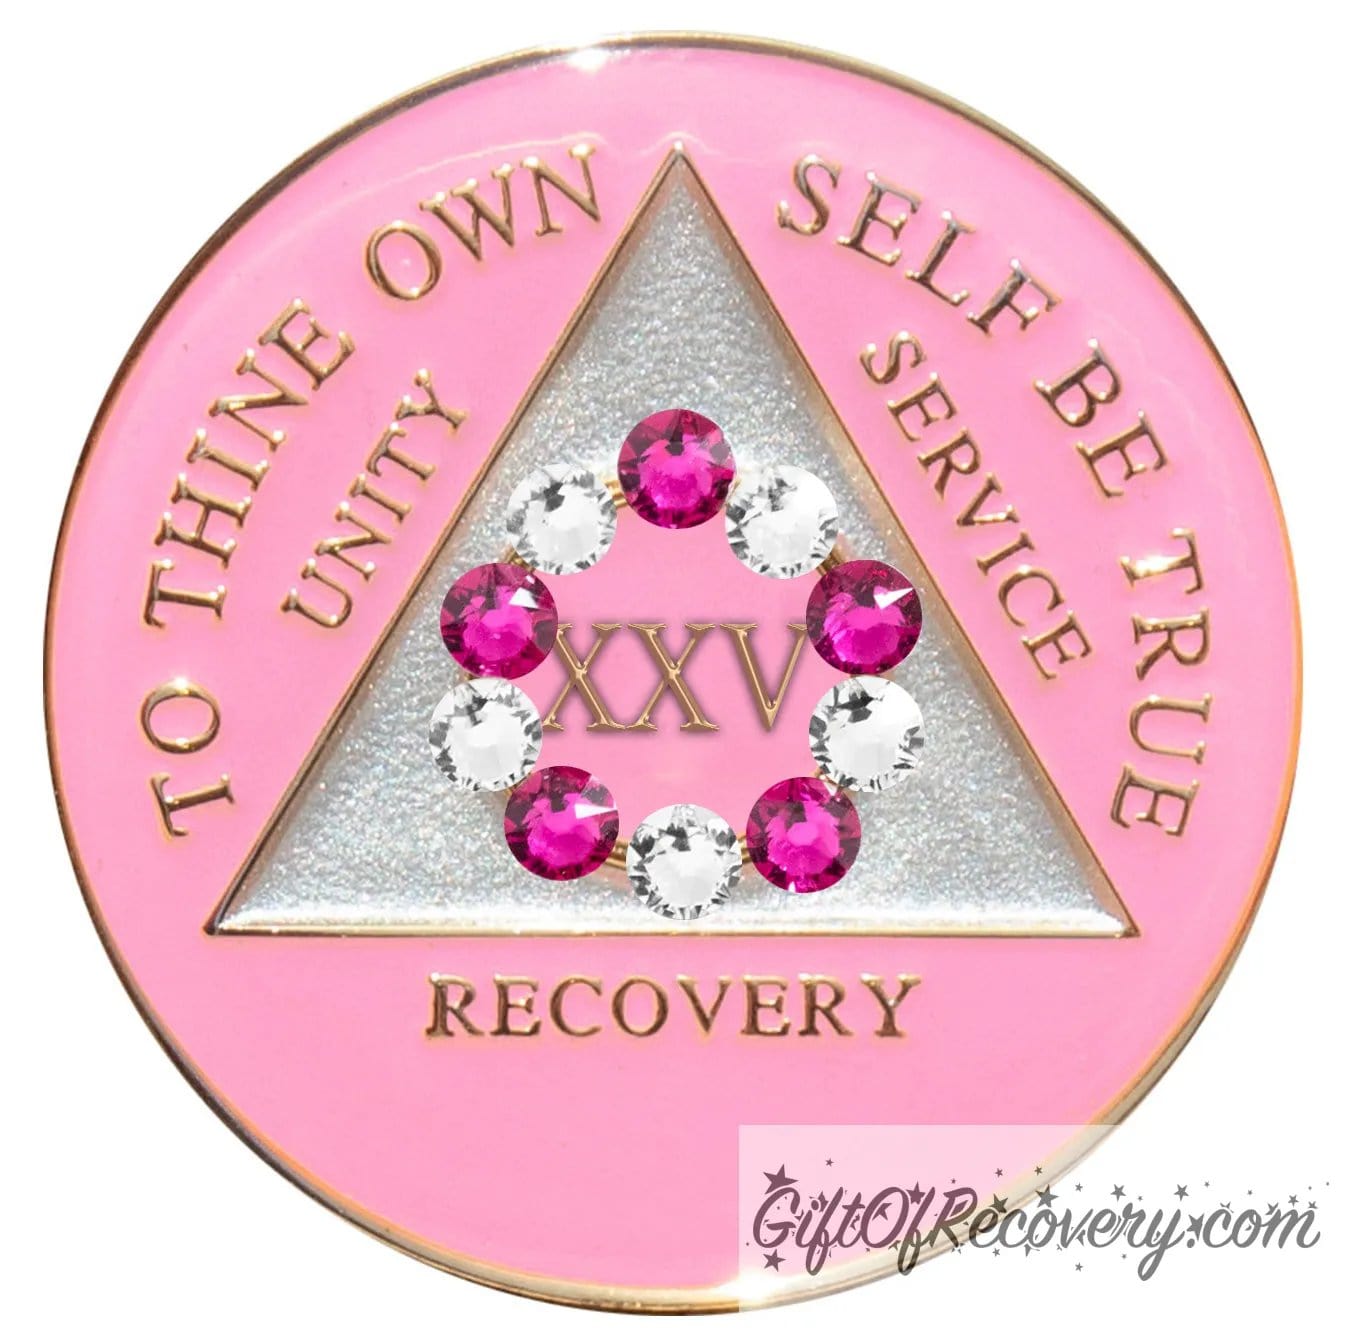 25 year princess pink AA medallion with a pearl white triangle center and pink circle, surrounding the roman numeral 25 are 10 genuine crystals, 5 dark pink and 5 clear, perfect for your favorite sober princess, to thine own self be true, unity, service, recovery, the rim of the medallion, the raised triangle outline, and the roman numeral year, are in 14k gold, sealed with resin for a glossy finish.